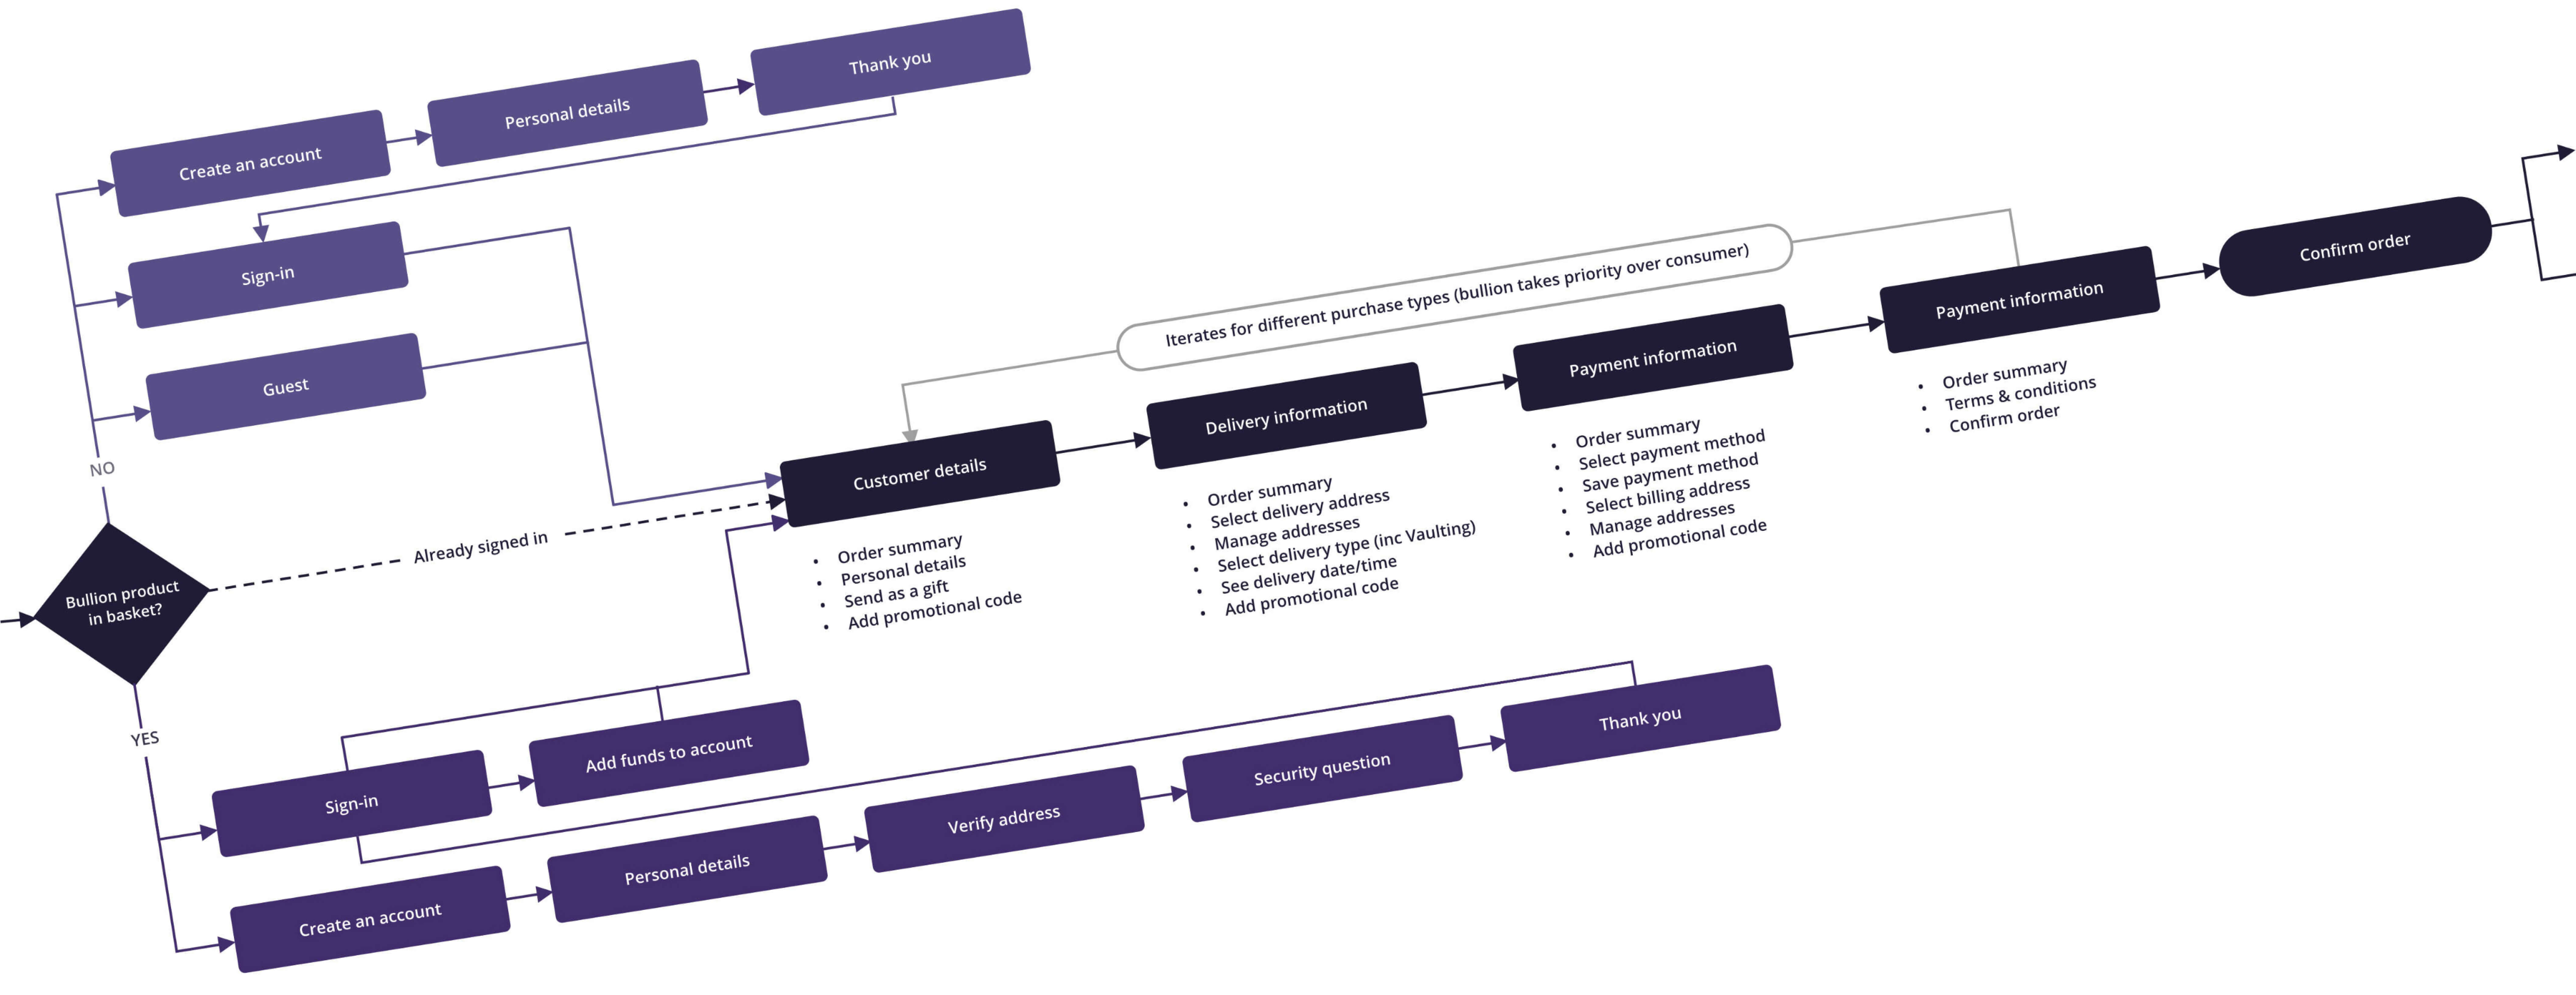 Consumer Purchase Journey user flow image